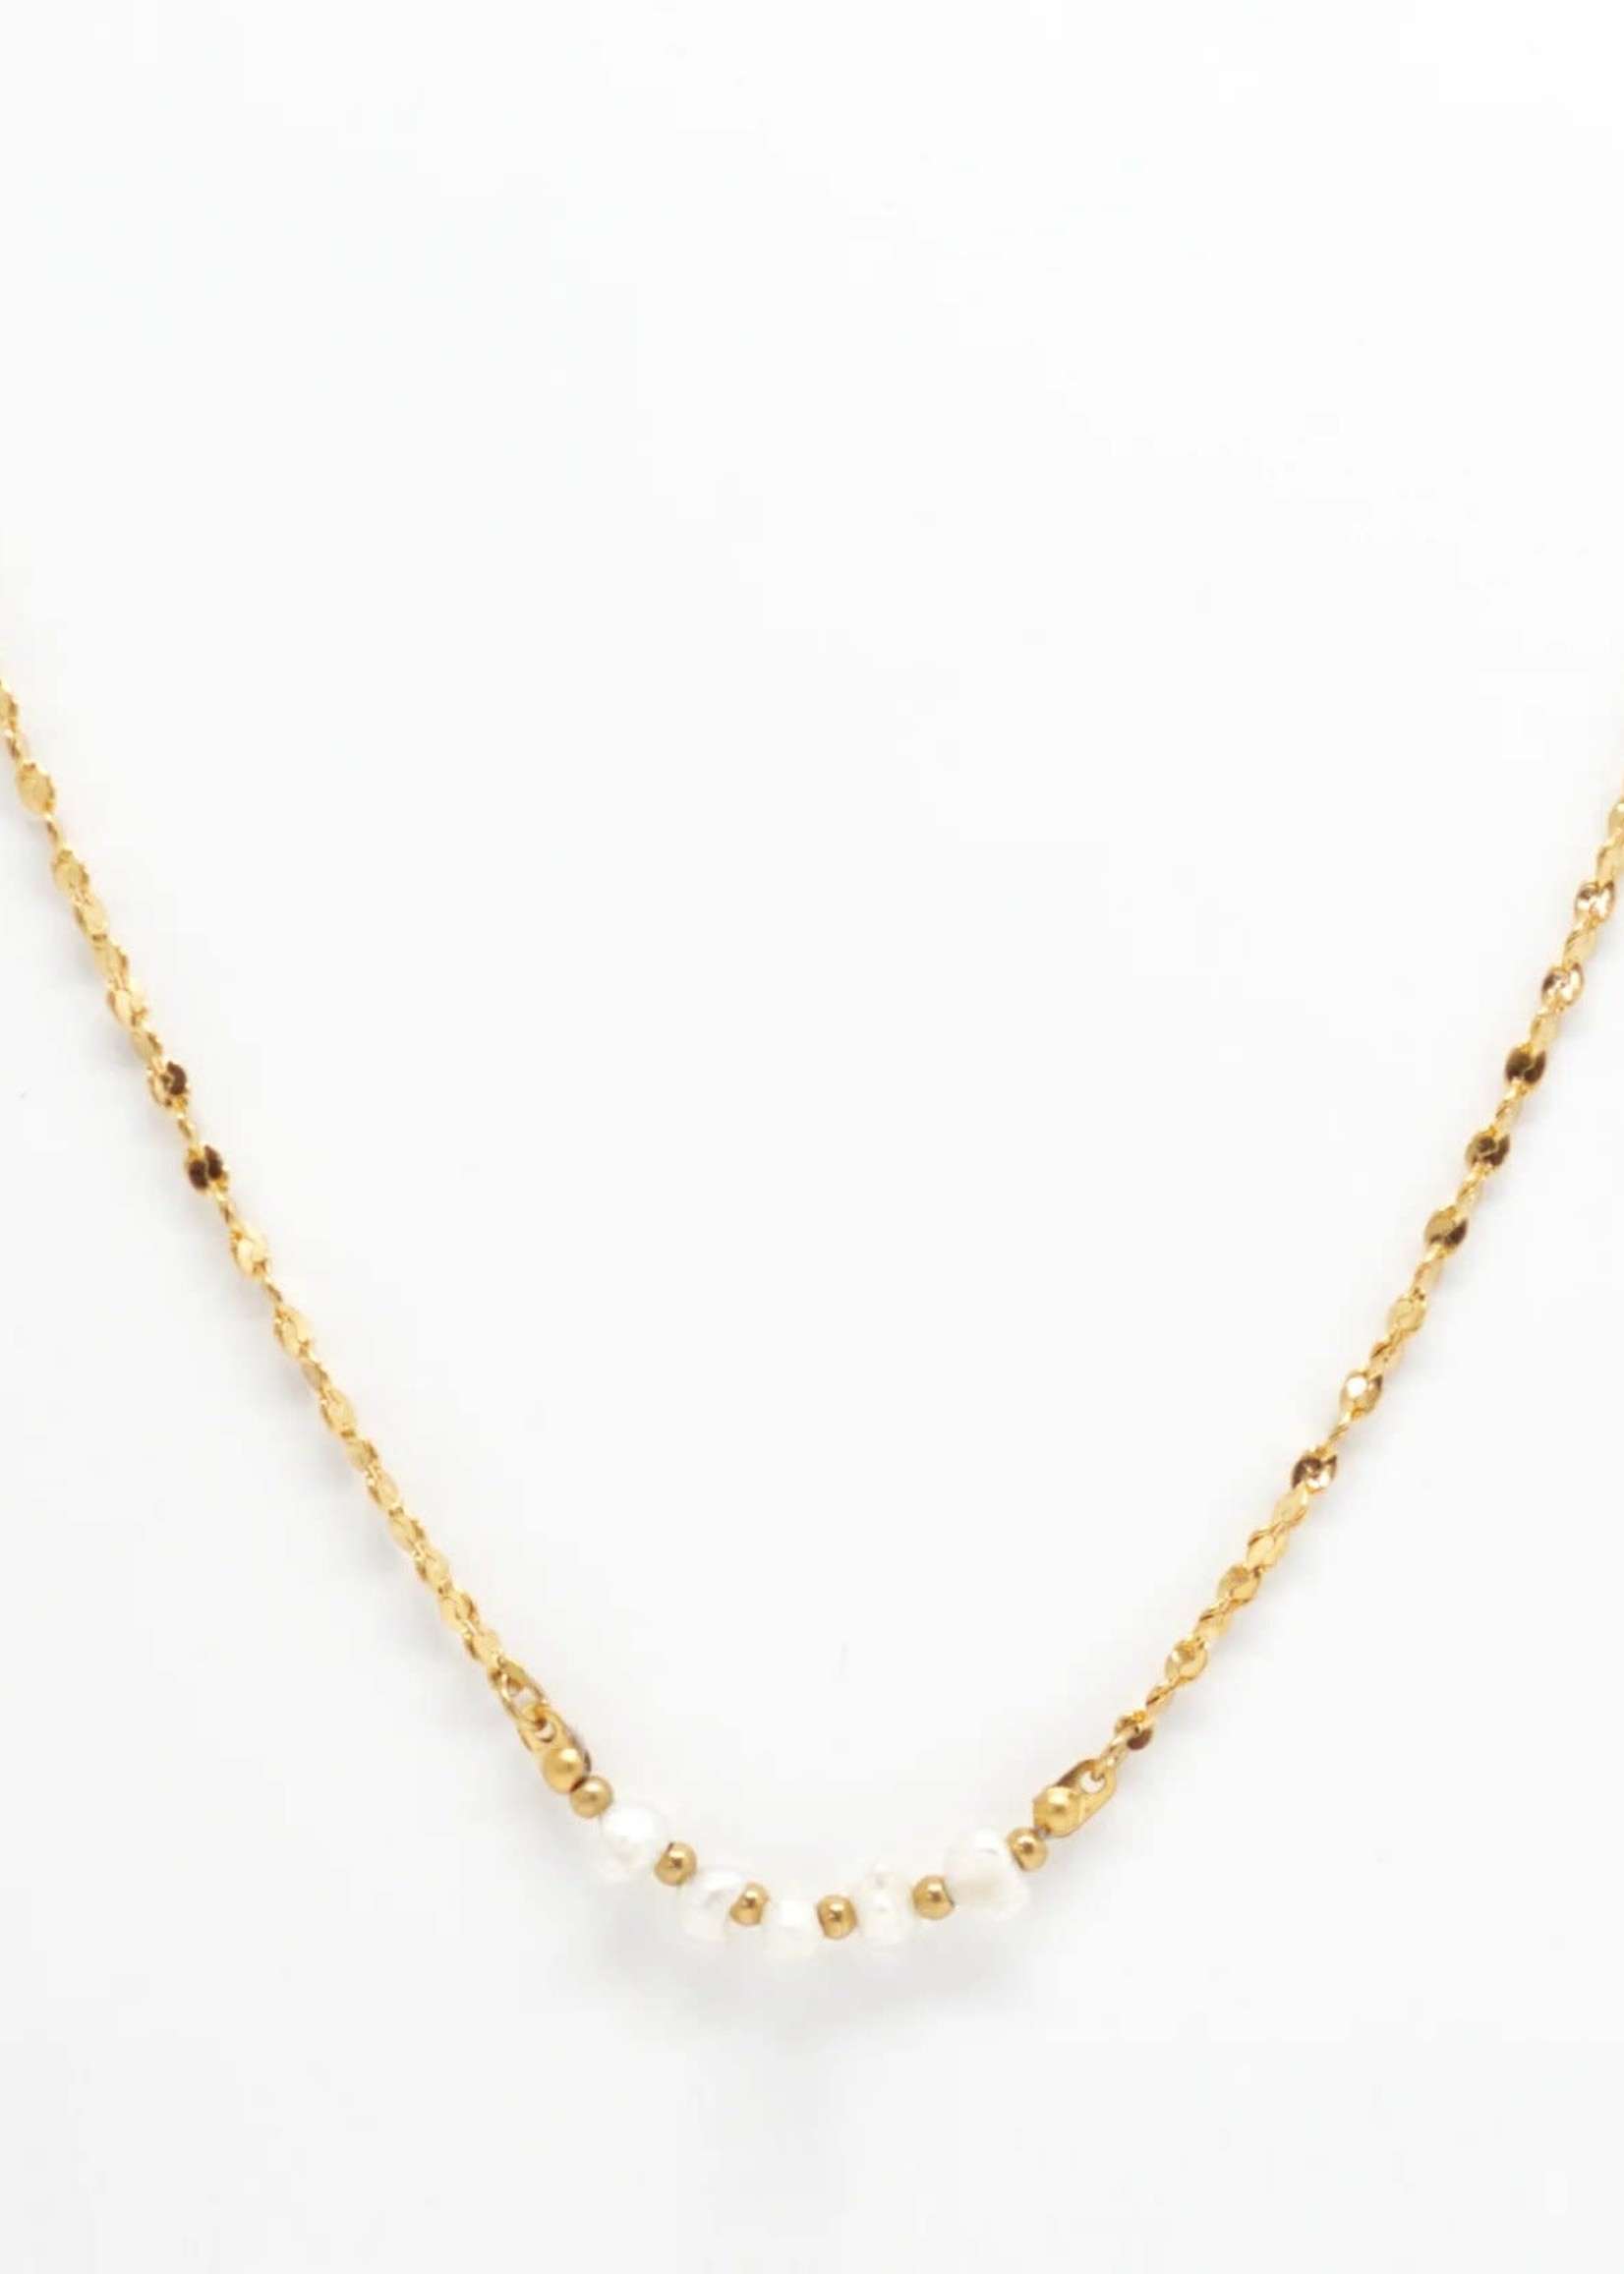 Salty Cali Pearl & Chain Necklace - Salty Shells